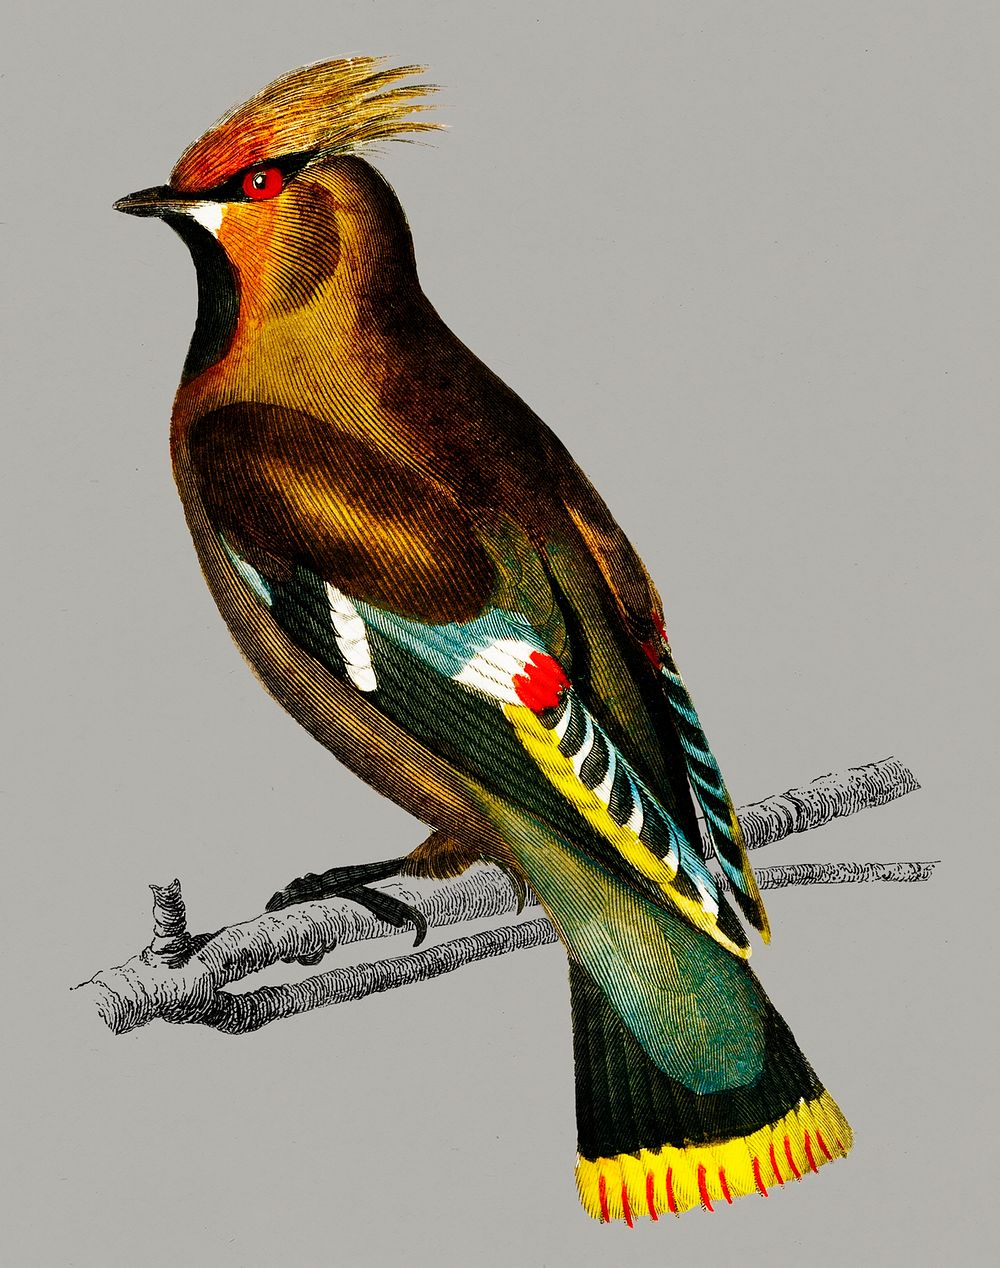 Vintage Illustration of Bohemian waxwing.